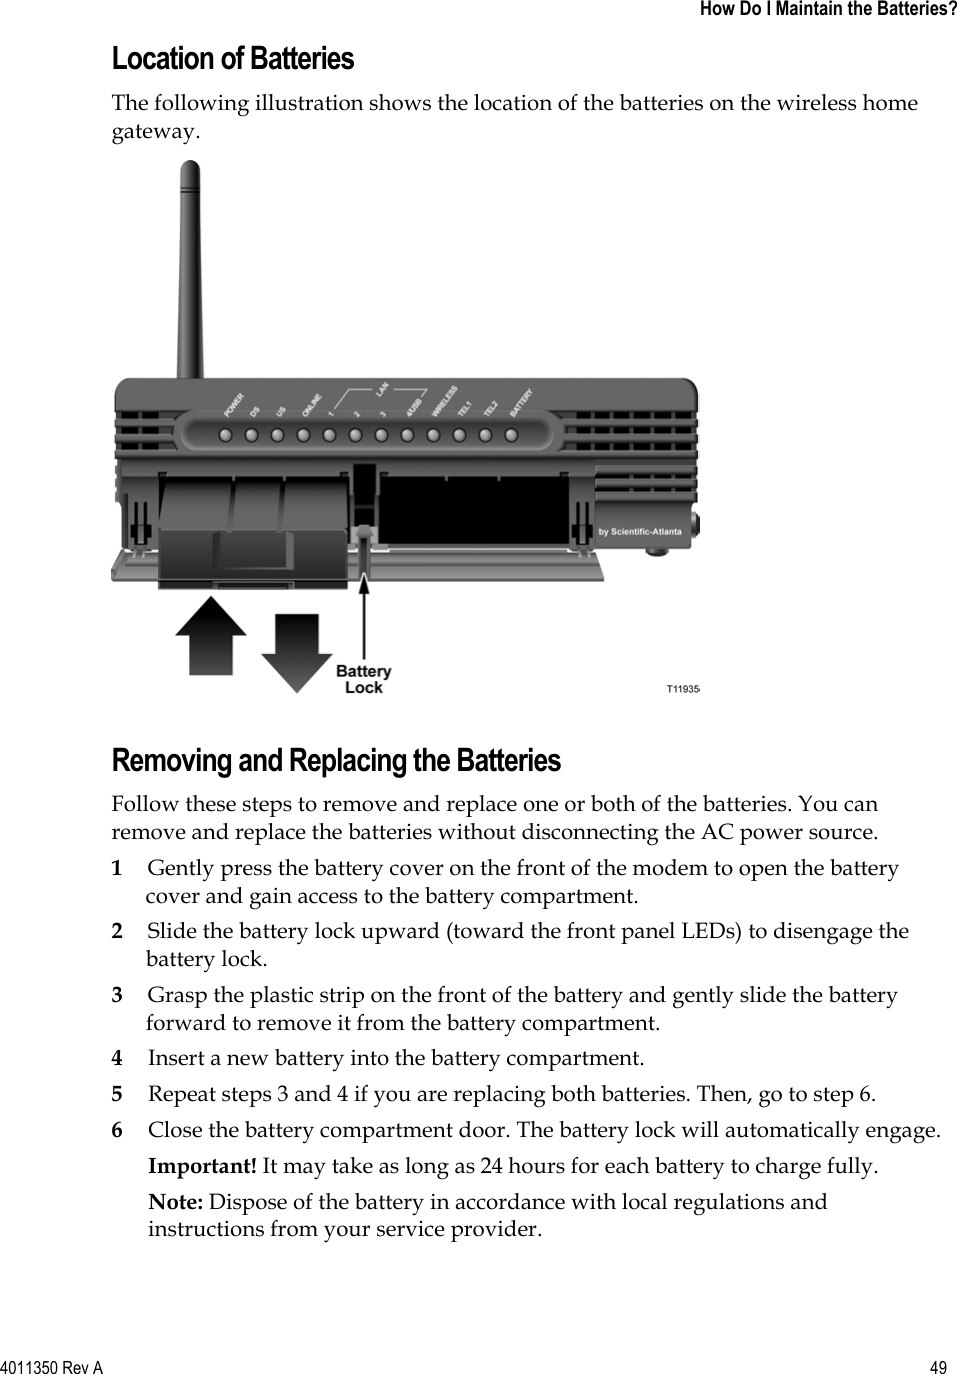 4011350 Rev A    49 How Do I Maintain the Batteries?Location of Batteries The following illustration shows the location of the batteries on the wireless home gateway.Removing and Replacing the Batteries Follow these steps to remove and replace one or both of the batteries. You can remove and replace the batteries without disconnecting the AC power source. 1Gently press the battery cover on the front of the modem to open the battery cover and gain access to the battery compartment. 2Slide the battery lock upward (toward the front panel LEDs) to disengage the battery lock. 3Grasp the plastic strip on the front of the battery and gently slide the battery forward to remove it from the battery compartment. 4Insert a new battery into the battery compartment. 5Repeat steps 3 and 4 if you are replacing both batteries. Then, go to step 6. 6Close the battery compartment door. The battery lock will automatically engage. Important! It may take as long as 24 hours for each battery to charge fully. Note: Dispose of the battery in accordance with local regulations and instructions from your service provider. 